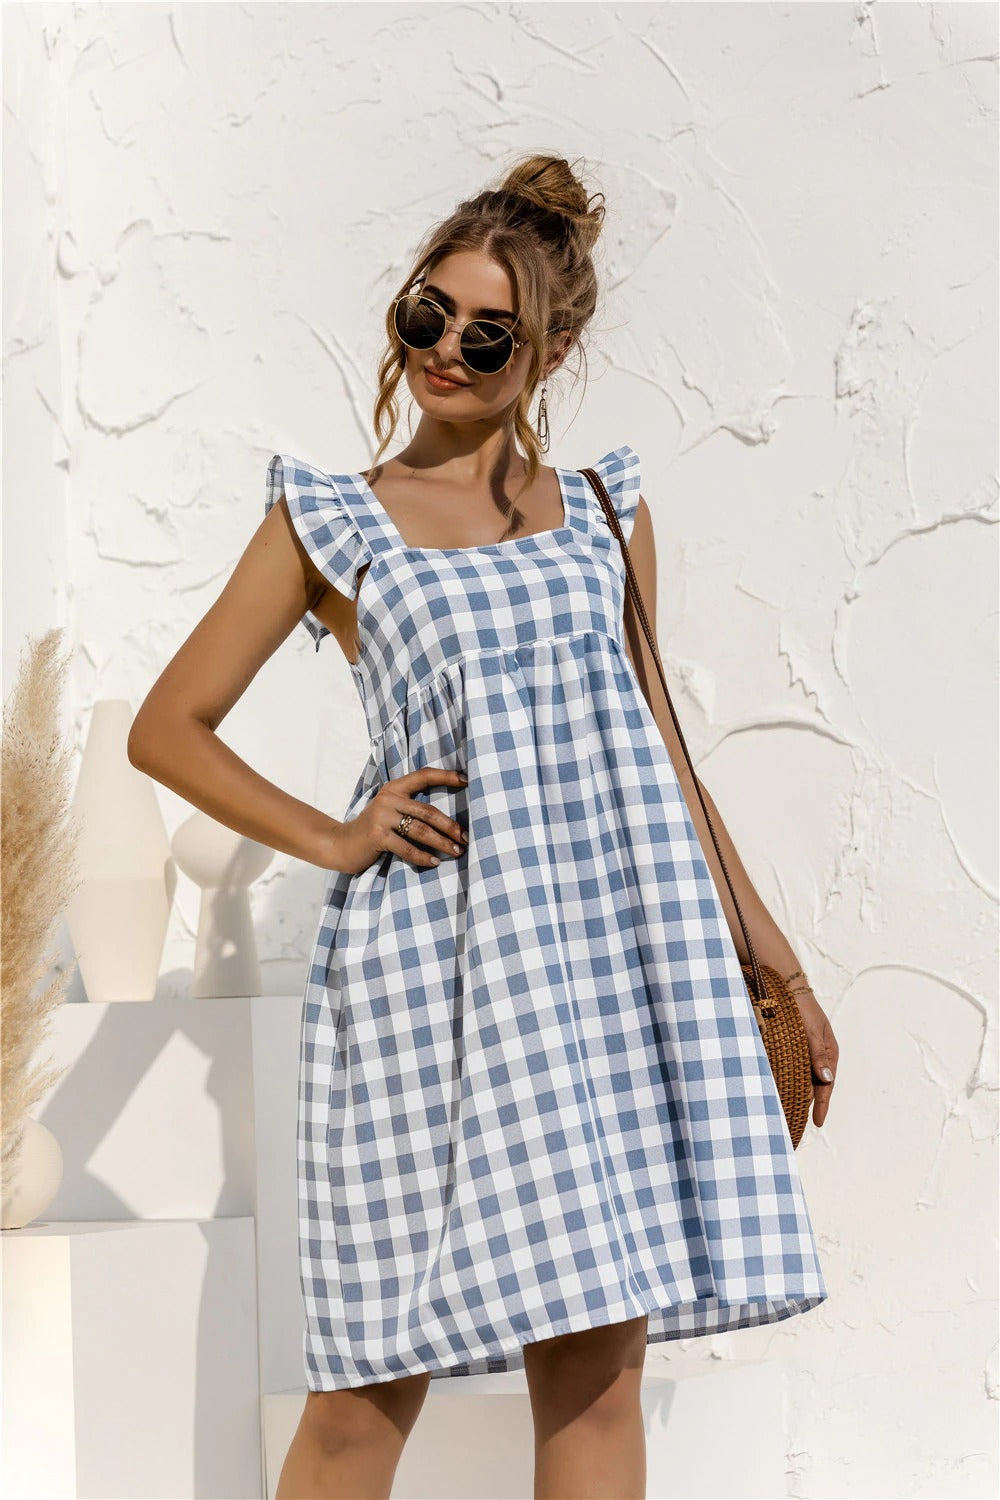 Coco Pleasing Plaid Butterfly Sleeves Gingham Mini Dress Coco dress